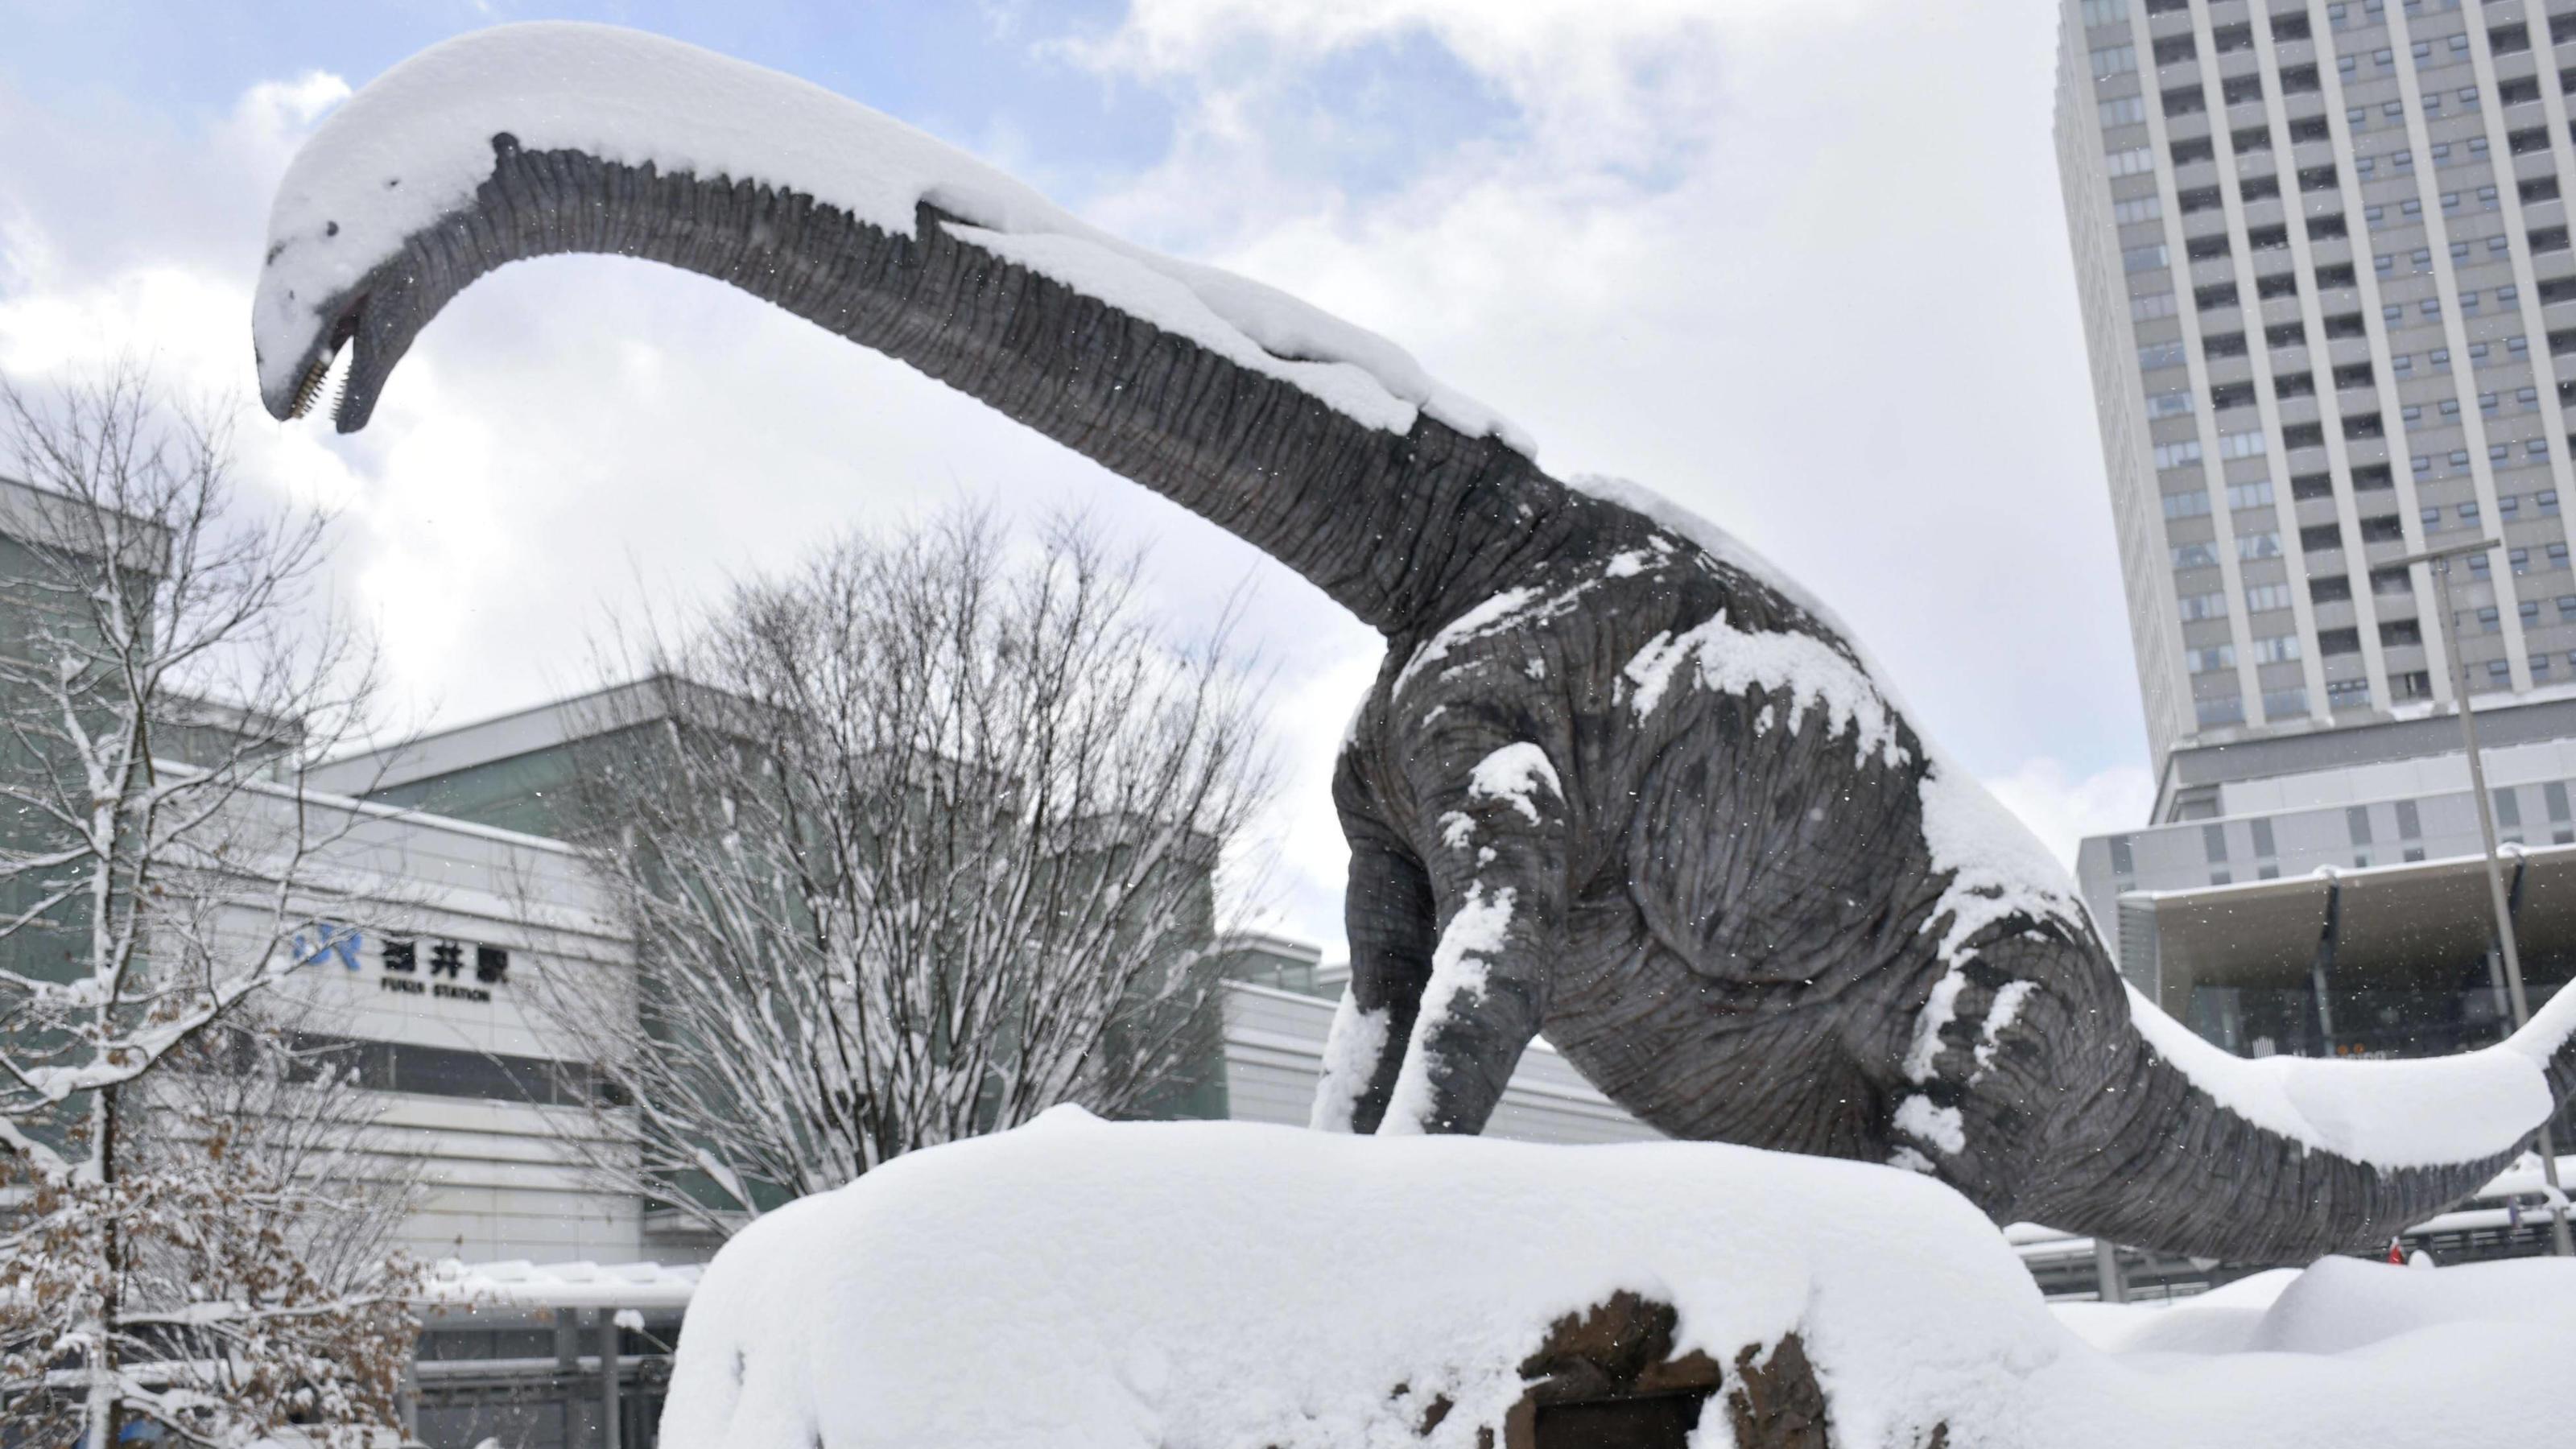  Freezing winter in Japan Photo taken on Dec. 27, 2021, shows a snow-covered dinosaur statue in front of Fukui Station in central Japan. Heavy snow hit many parts of Japan on Dec. 26. PUBLICATIONxINxGERxSUIxAUTxHUNxONLY A14AA0001175092P